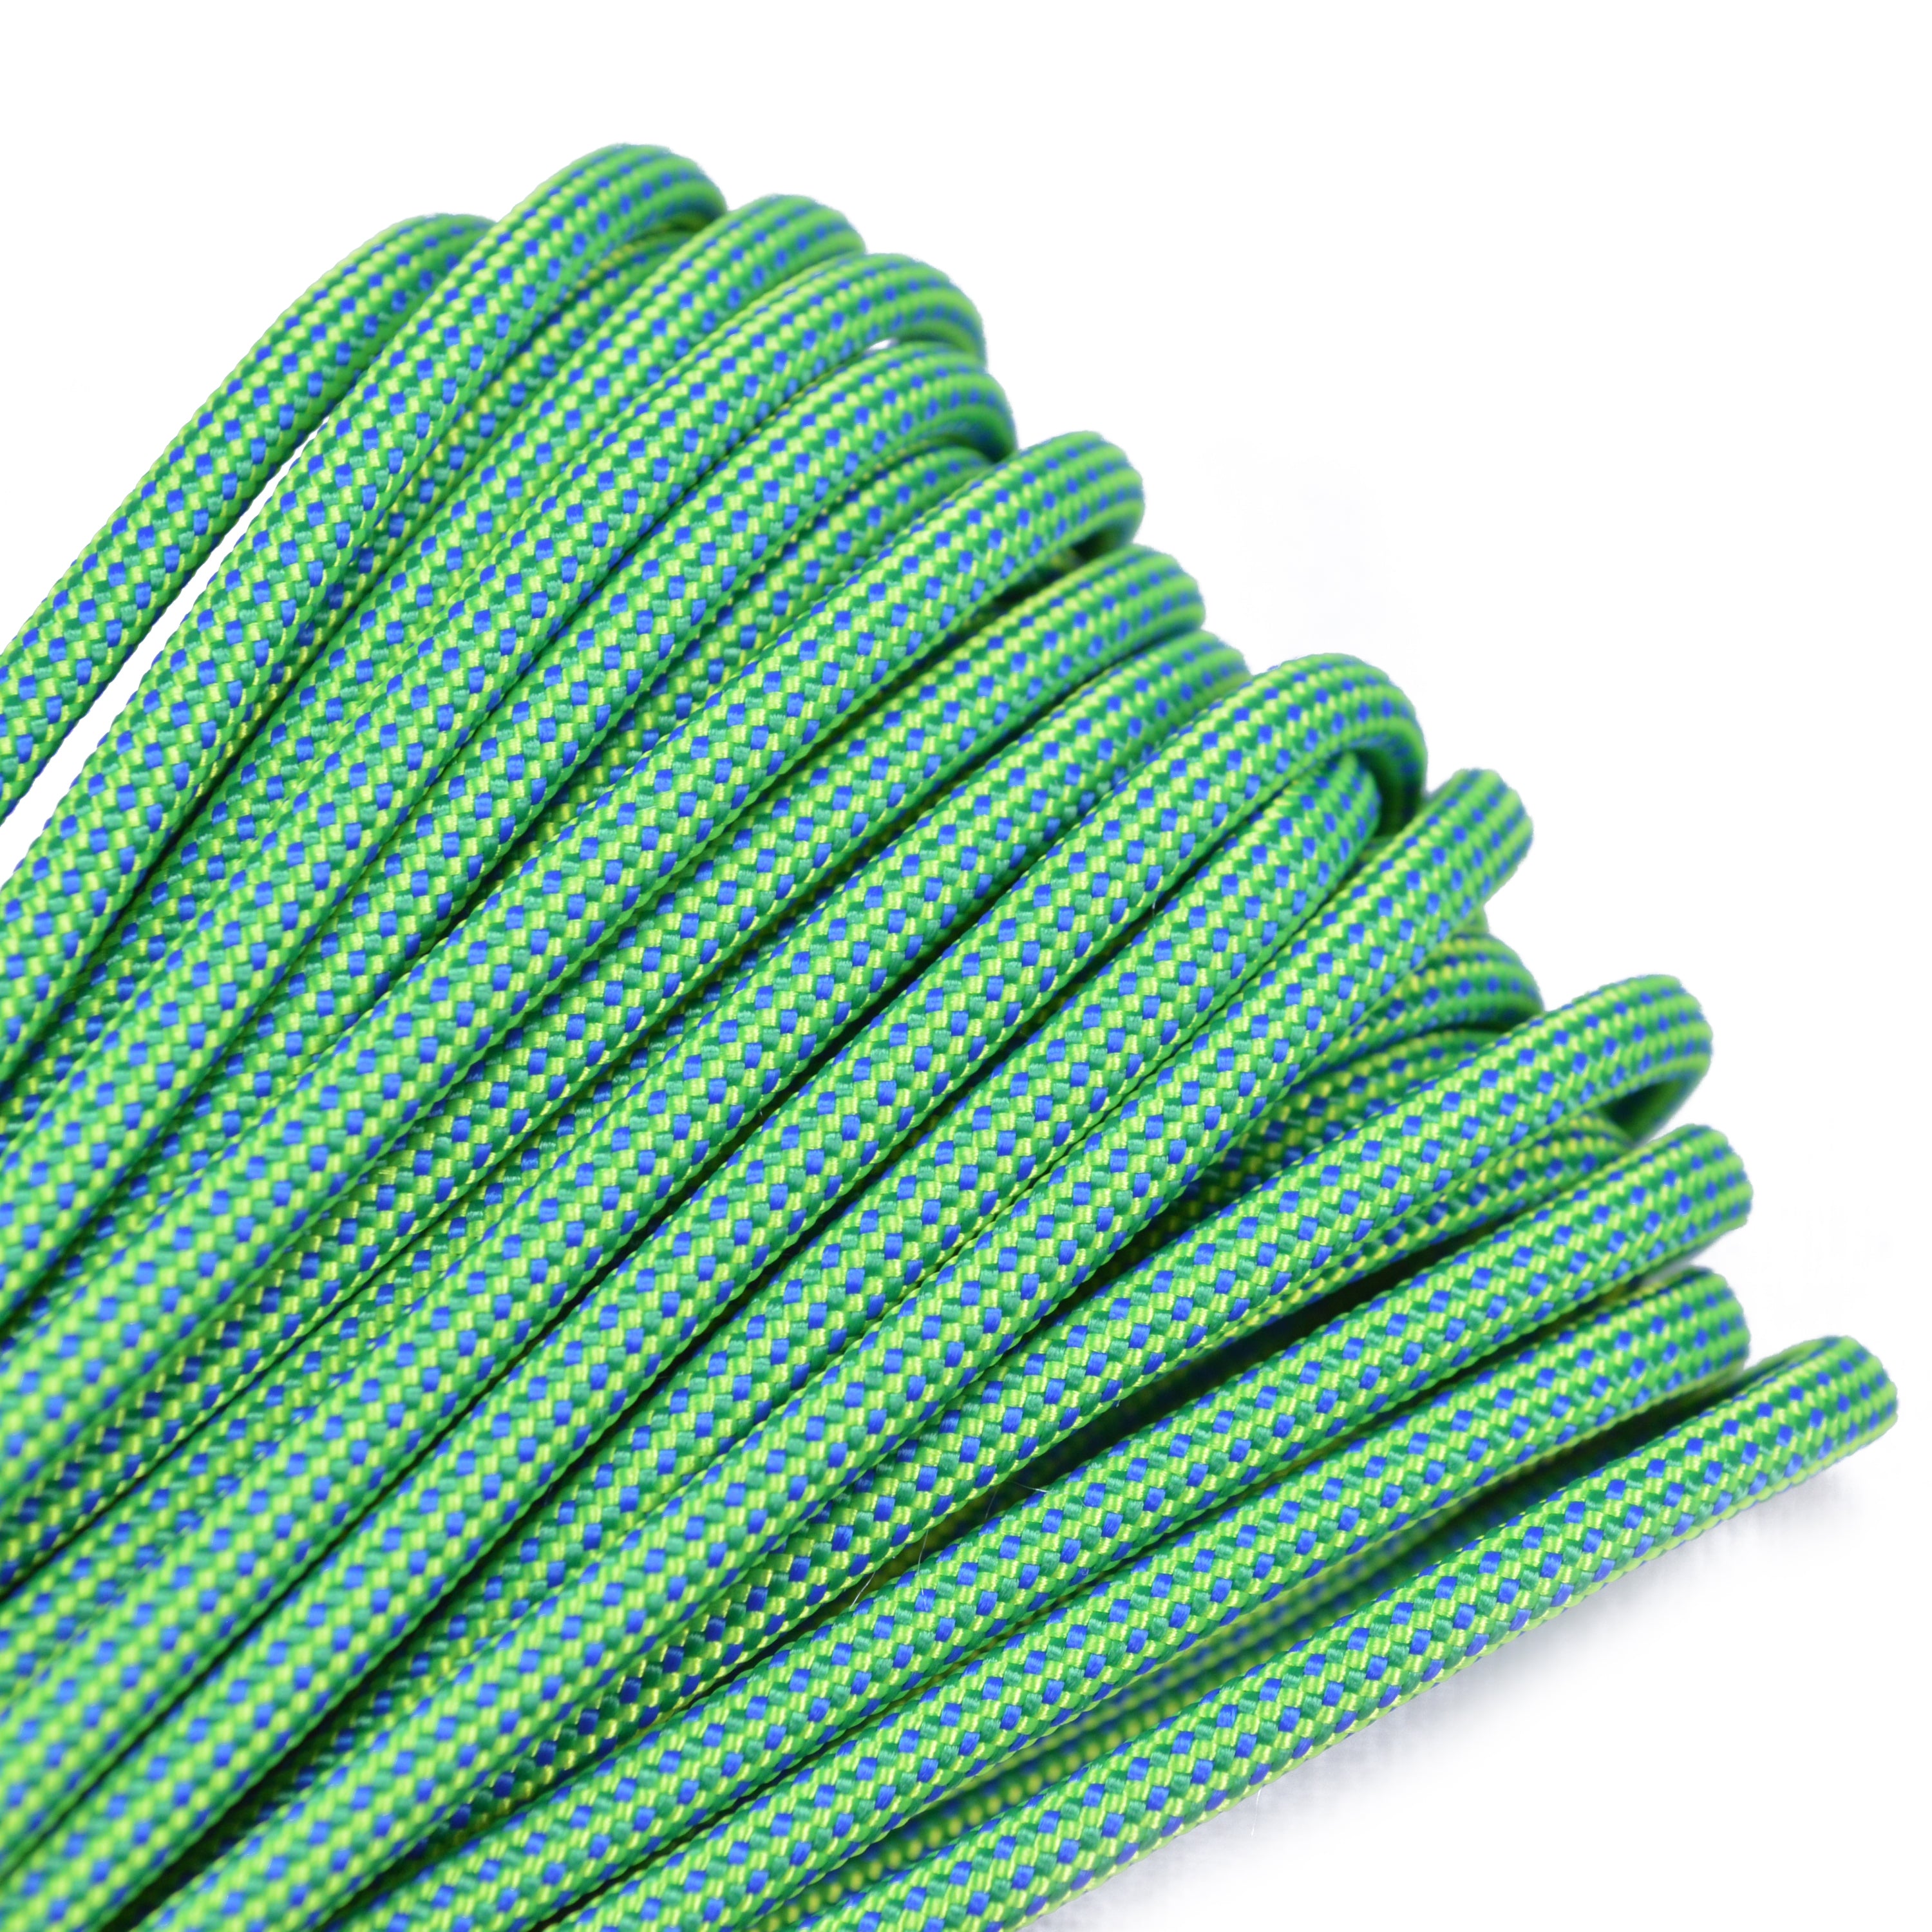 Bored Paracord Brand 550 lb Type III Paracord - Teal 50 Feet